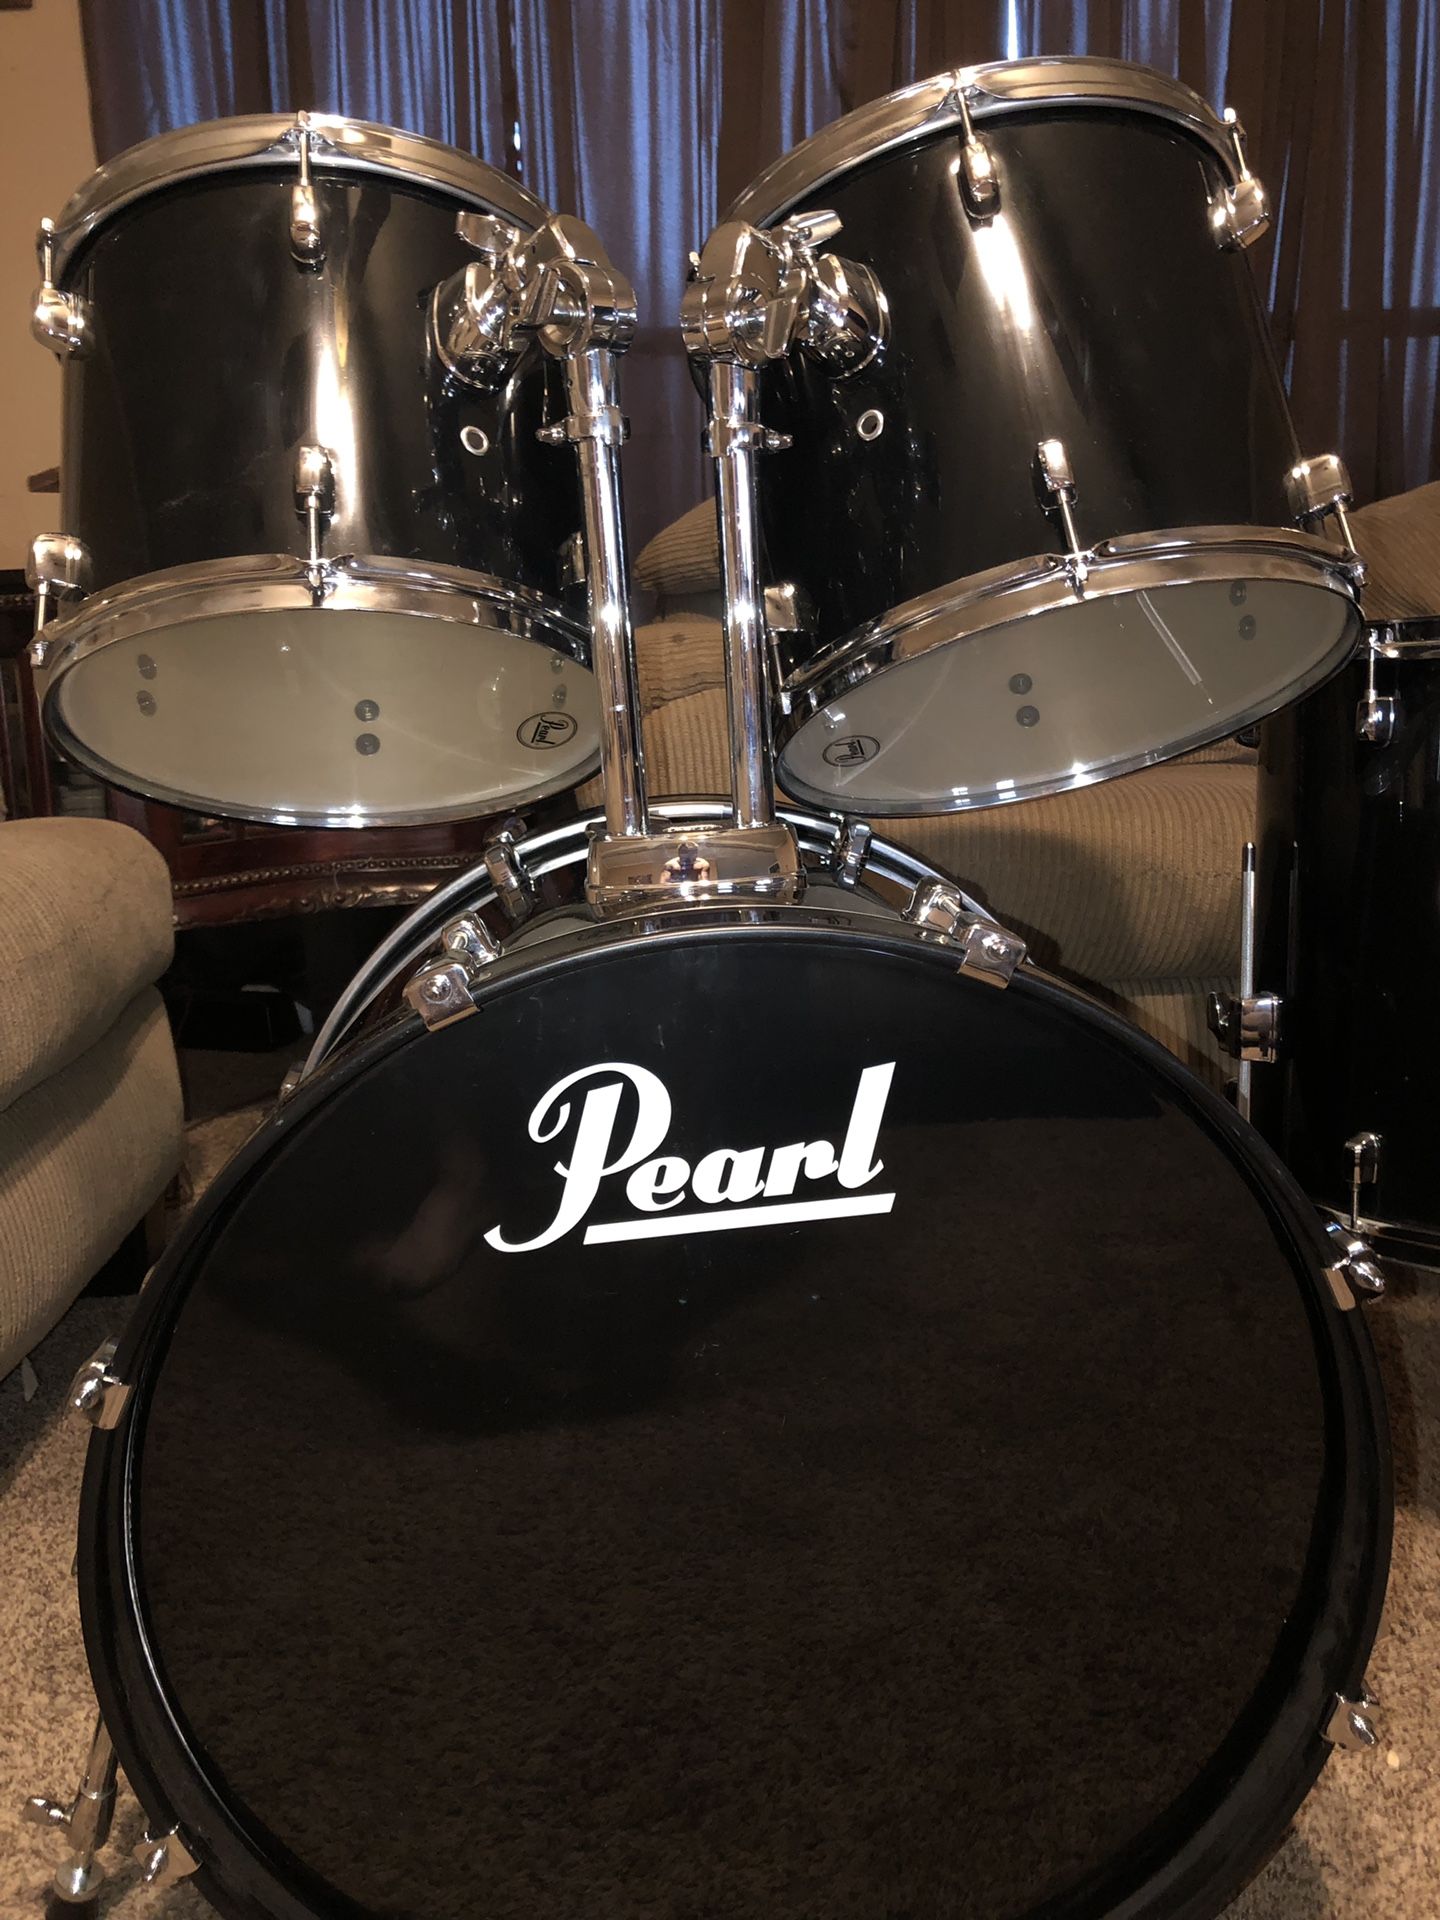 Pearl drum set all pieces shown included!